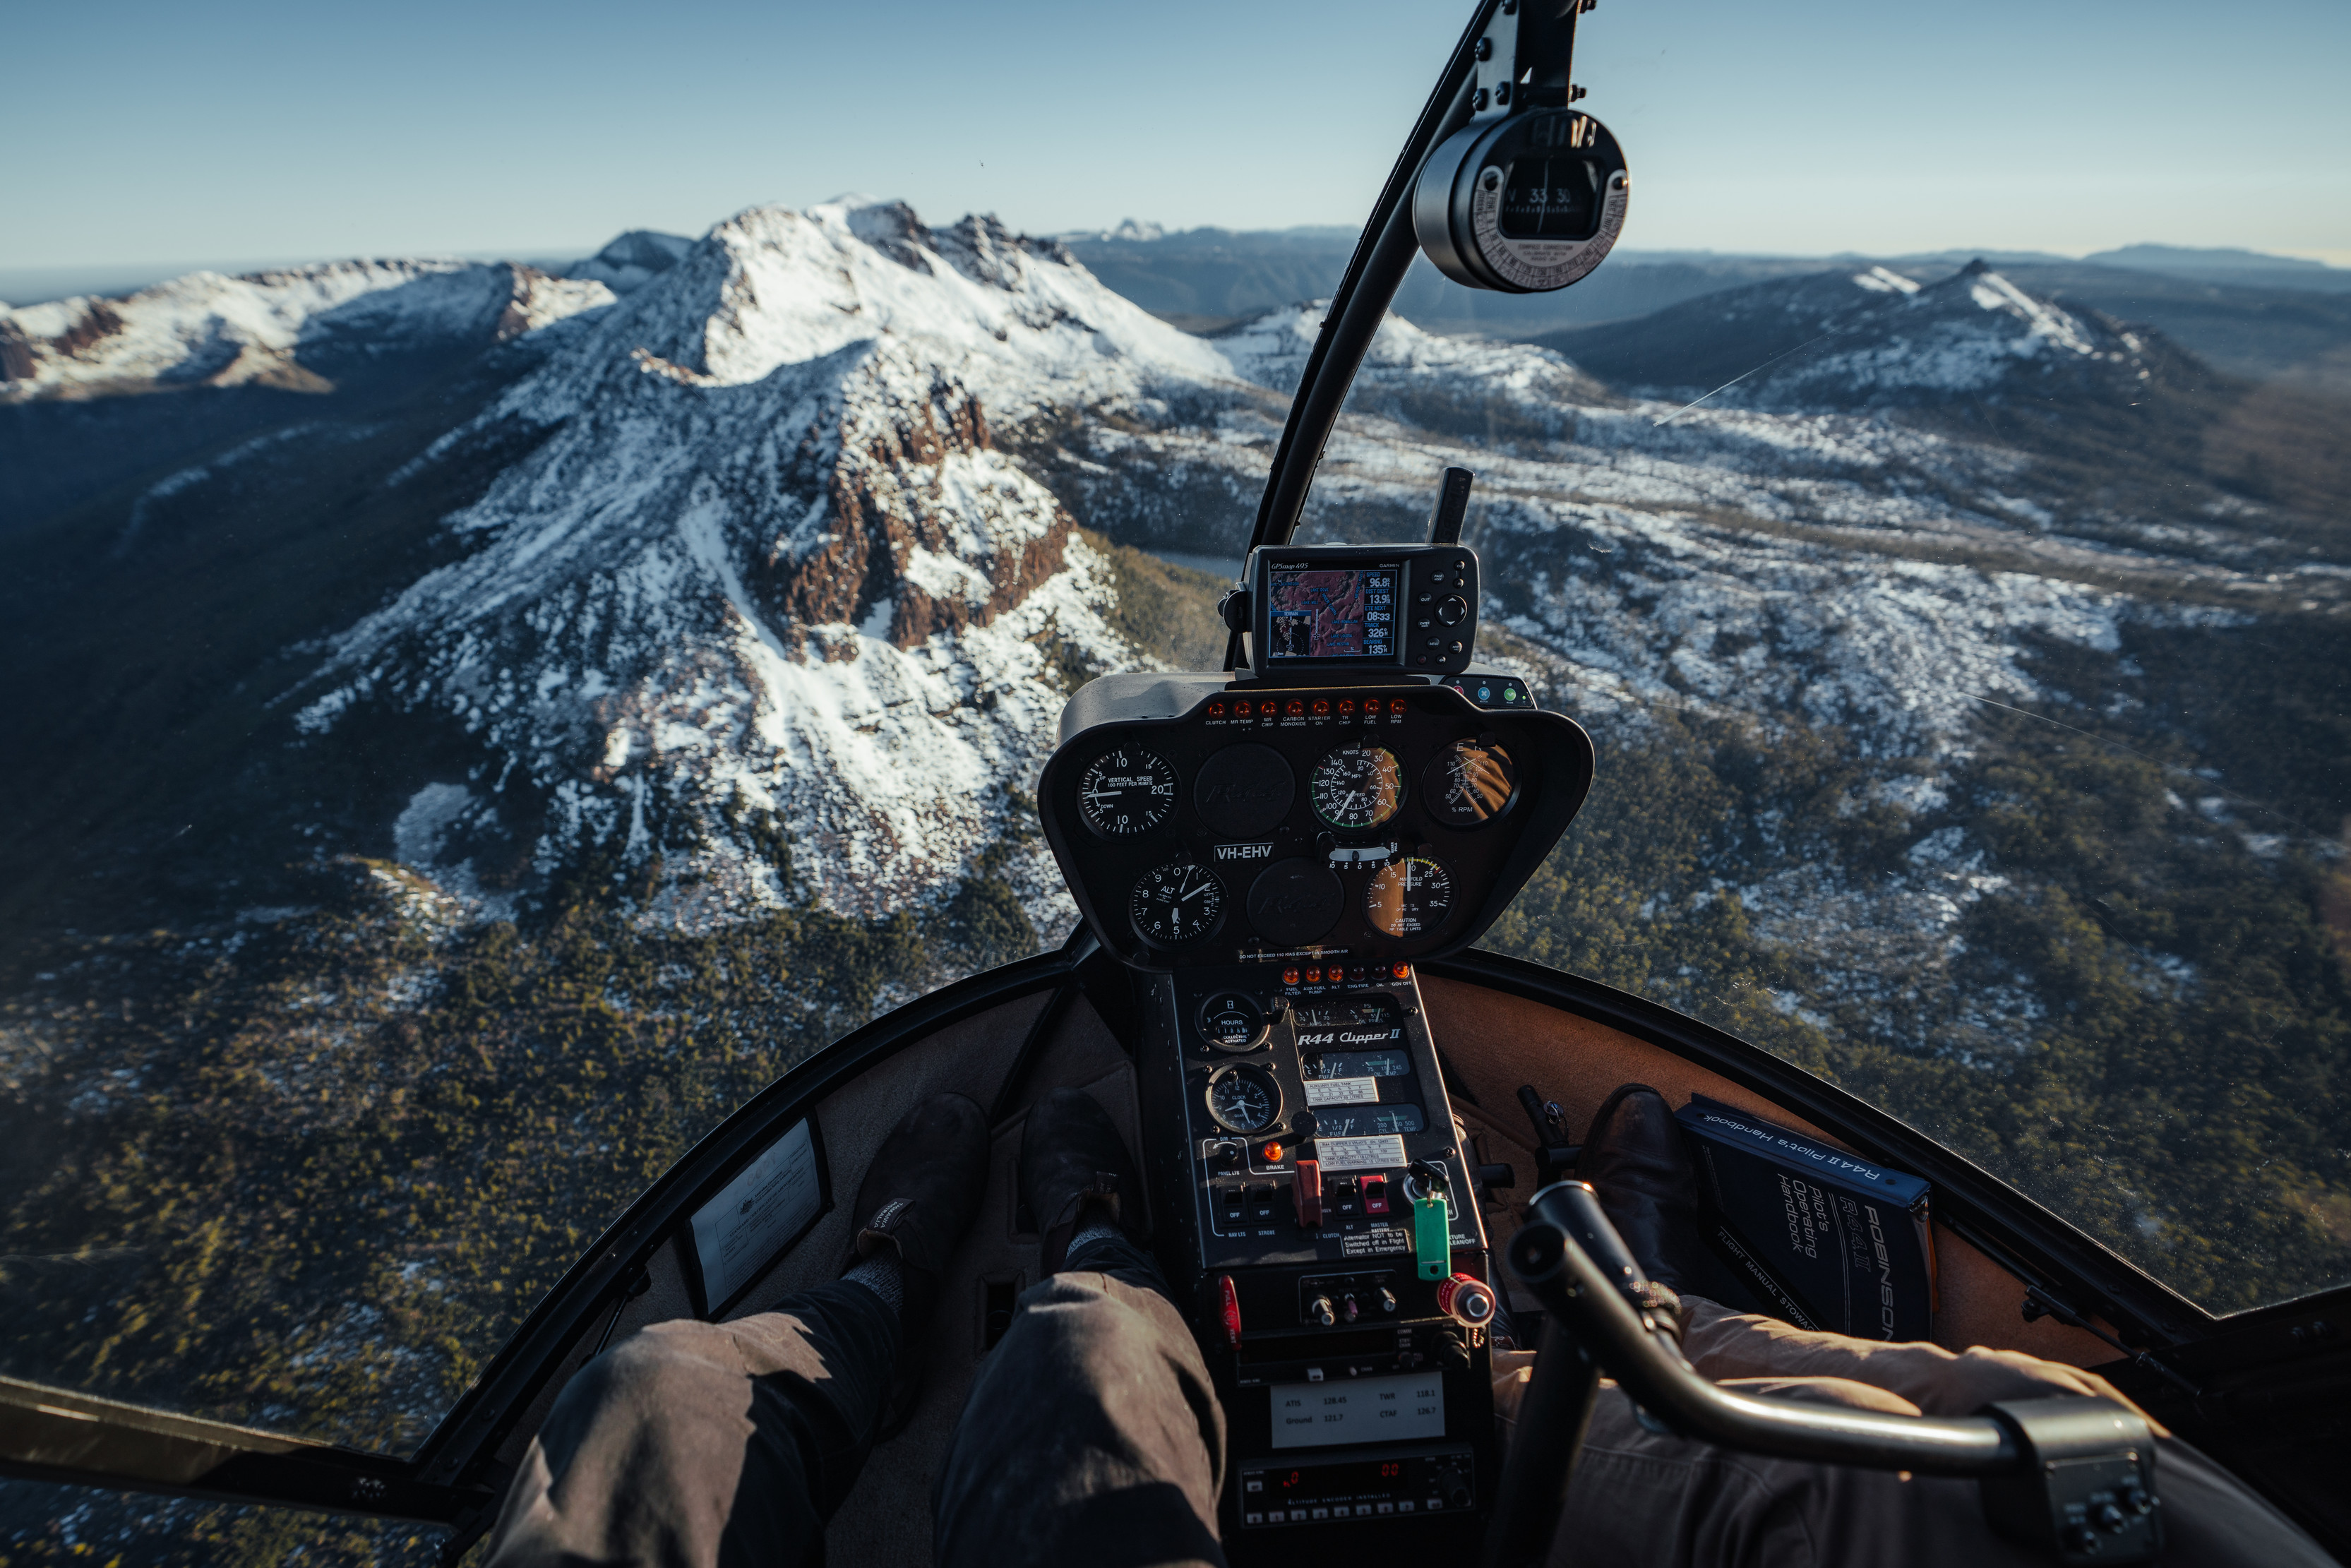 Jaw-dropping point of view image taken in a helicopter, overlooking the landscape of Mt Ossa and its surroundings, as part of Par Avion Wilderness Tours.